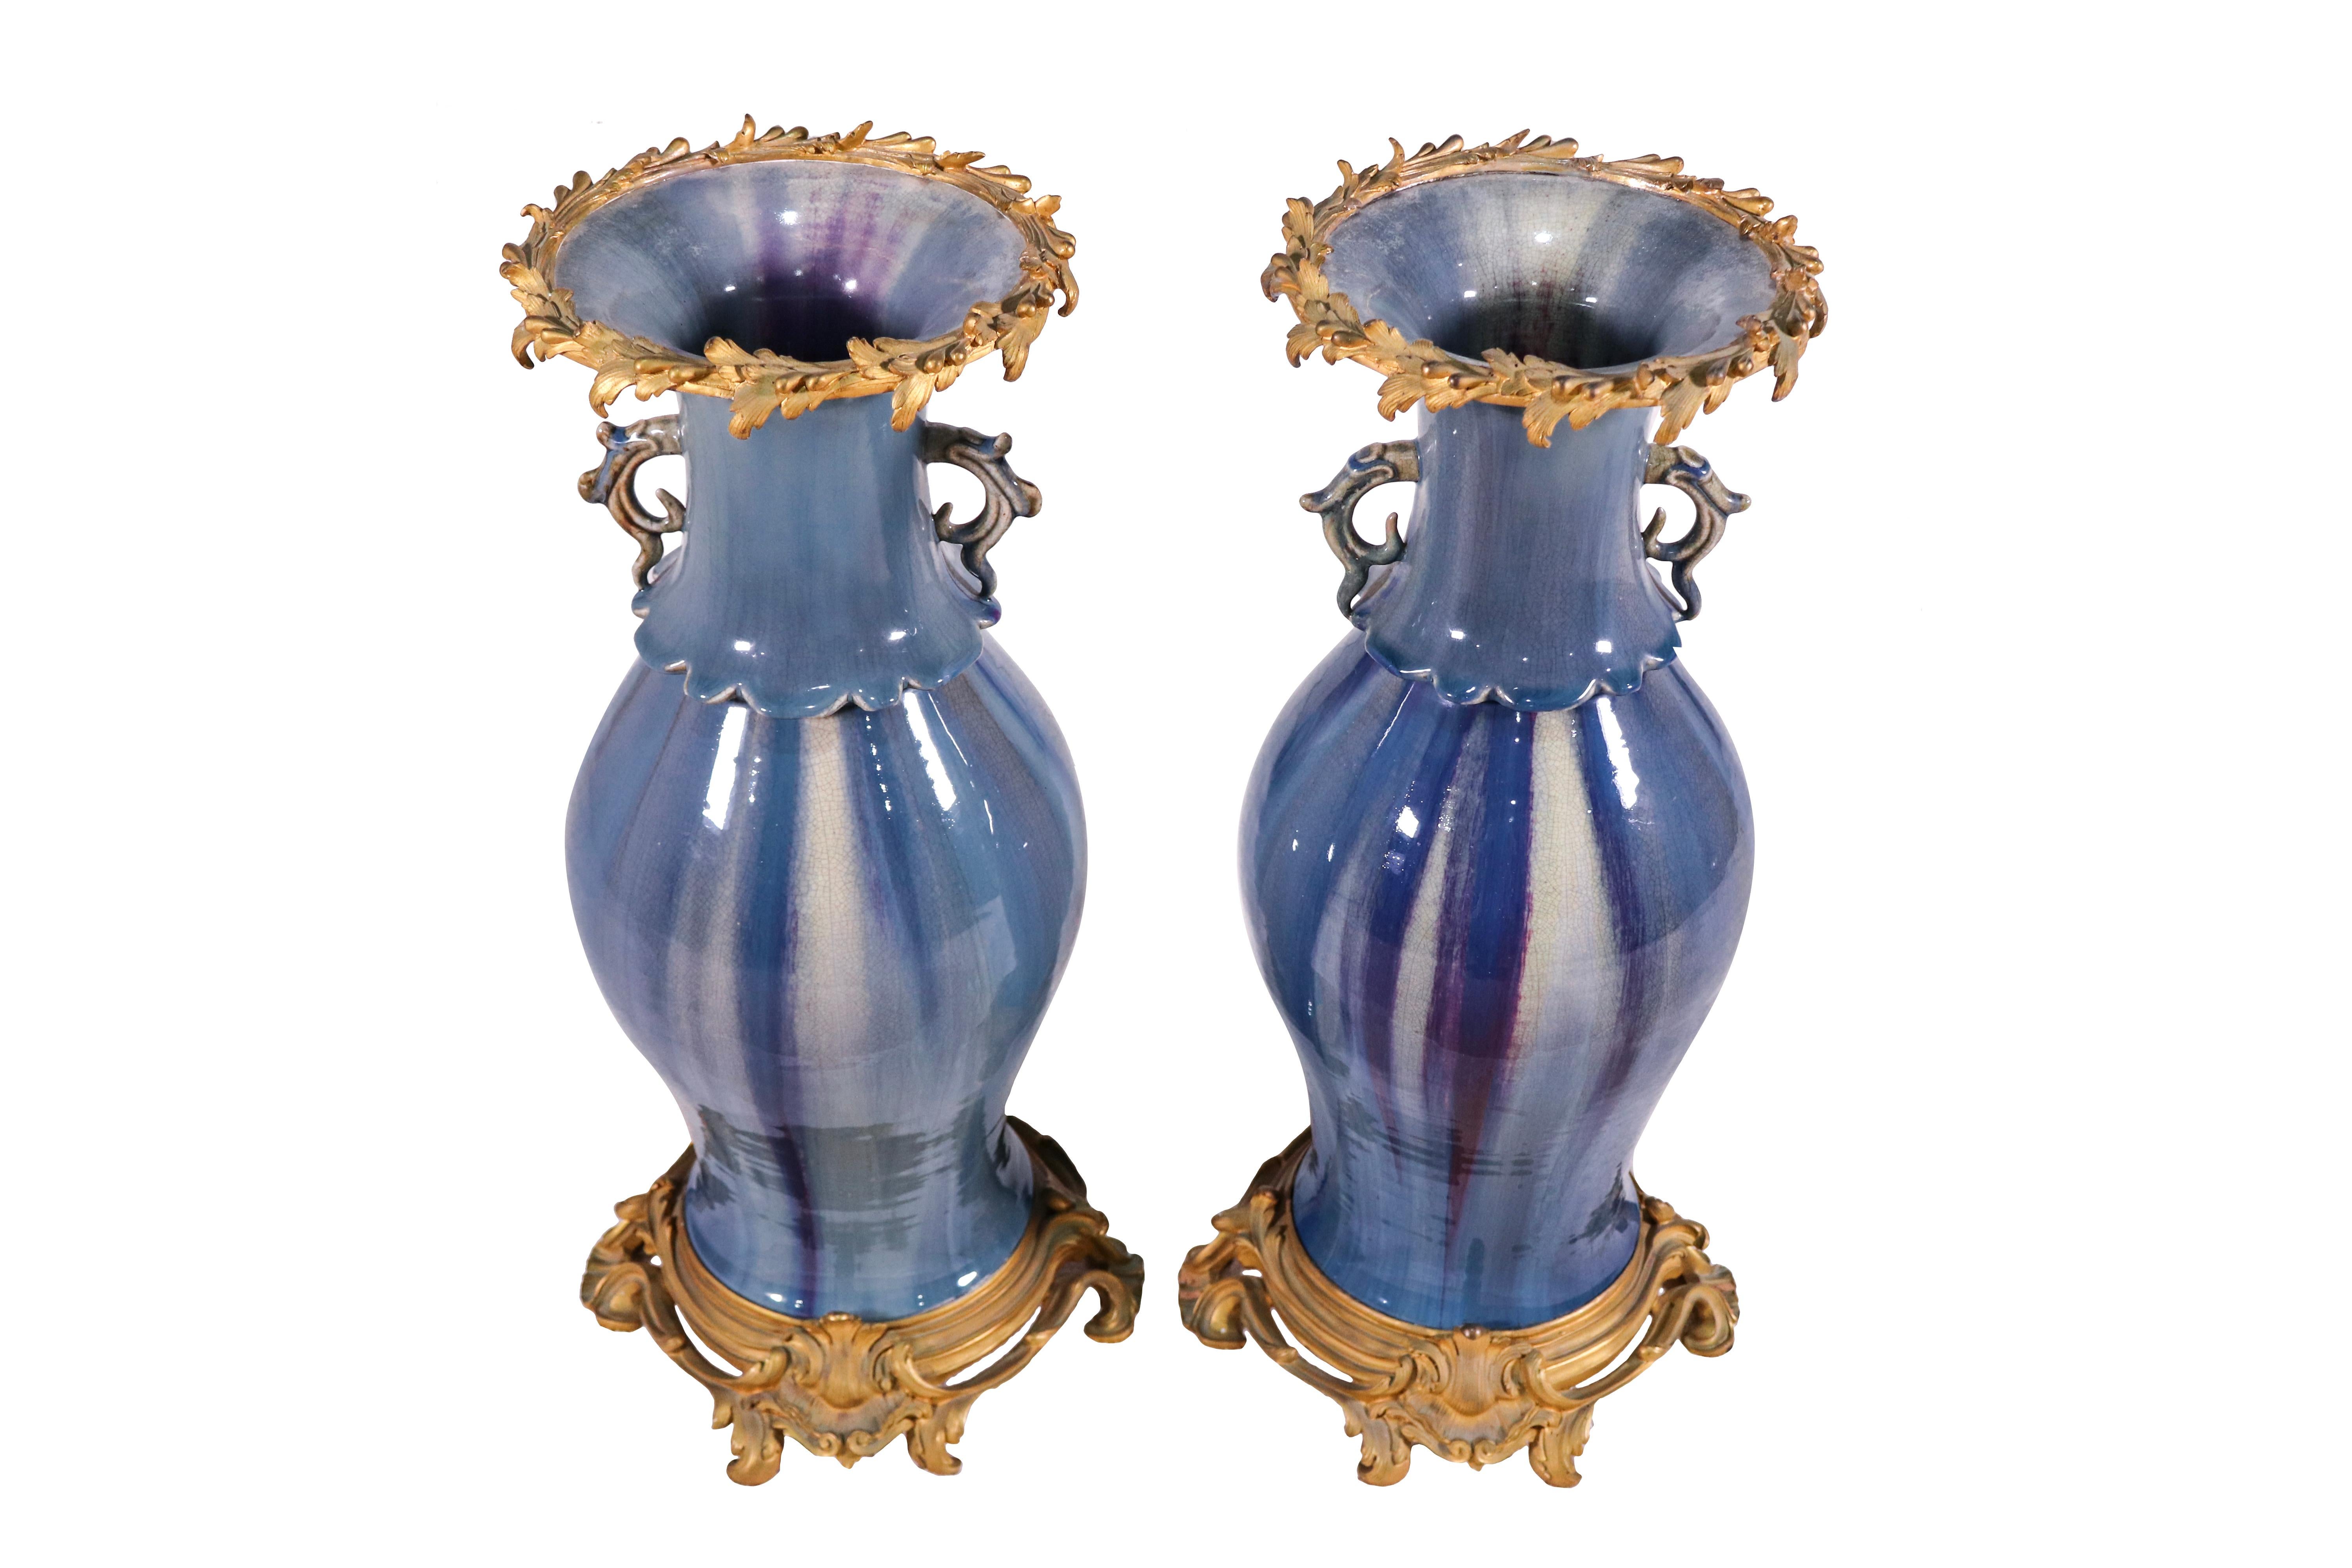 Pair of antique Chinese blue flambé glazed ceramic vases with later French (late 19th century) ormolu mounts – pierced rocaille base and wreath top rim. Two small decorative handles at the neck of the vases. The glazed surface displays minor wear